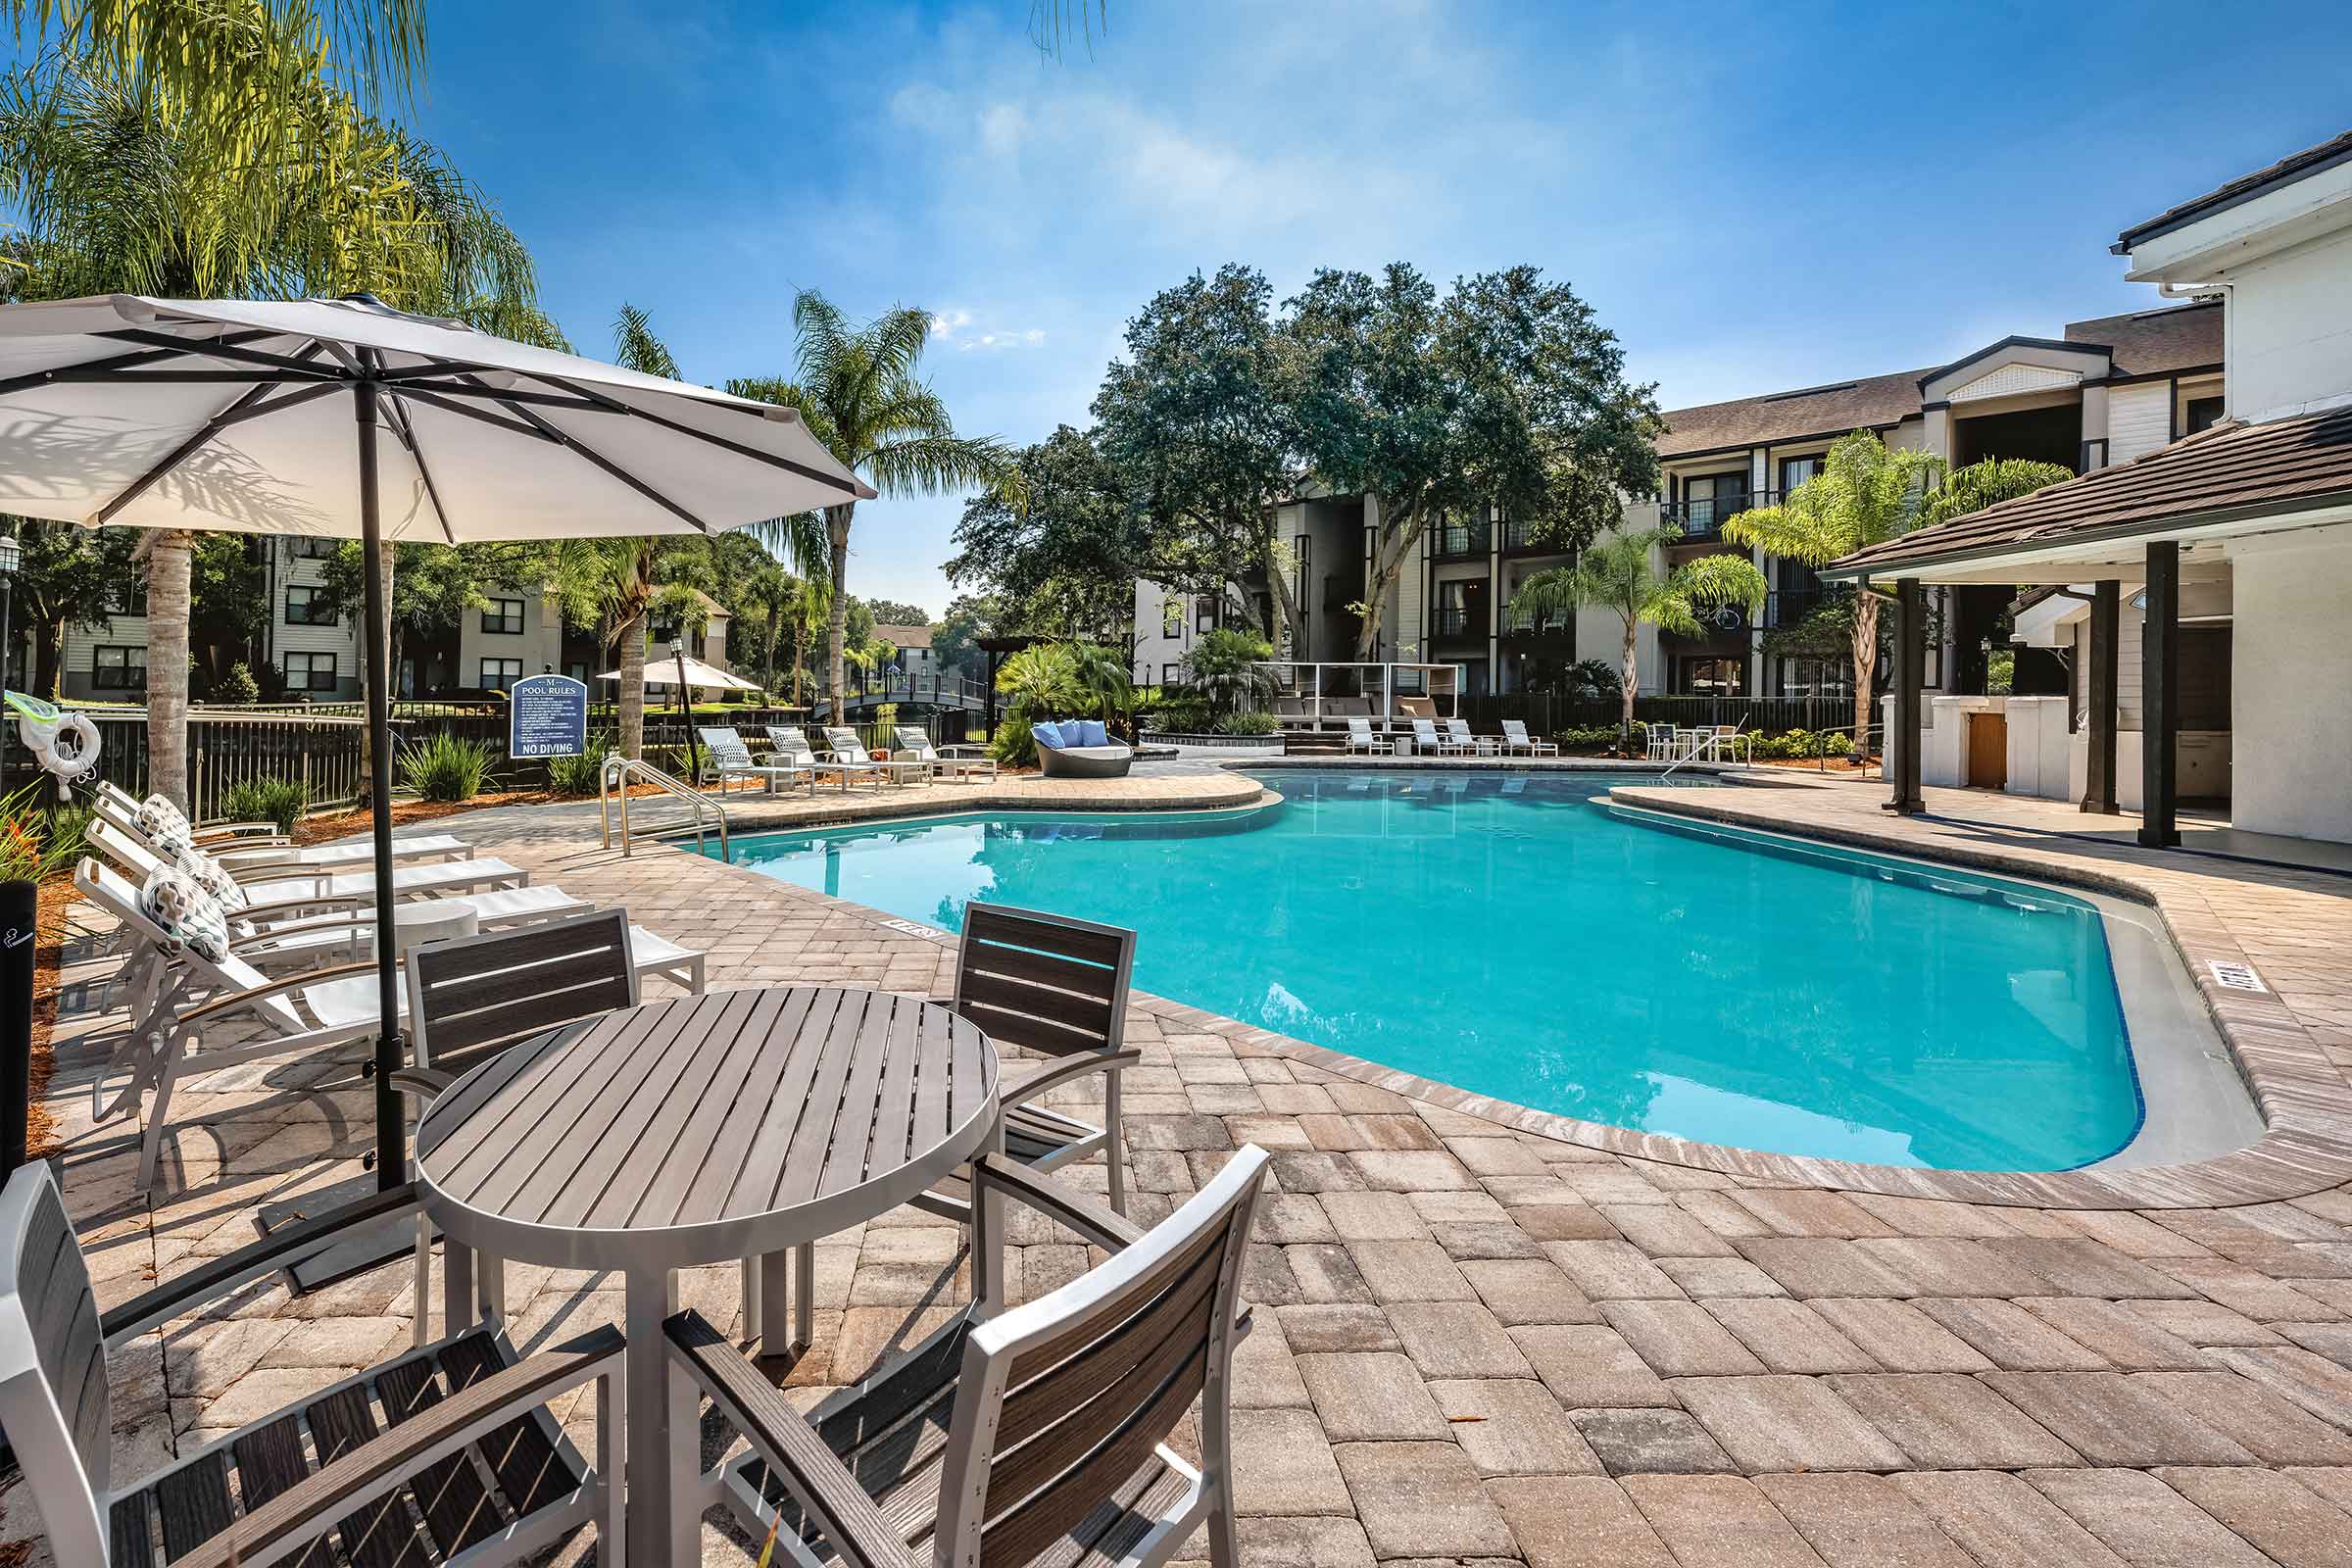 Pool-and-sun-deck,-available-to-residents-of-The-Meridian,-located-in-Jacksonville,-F